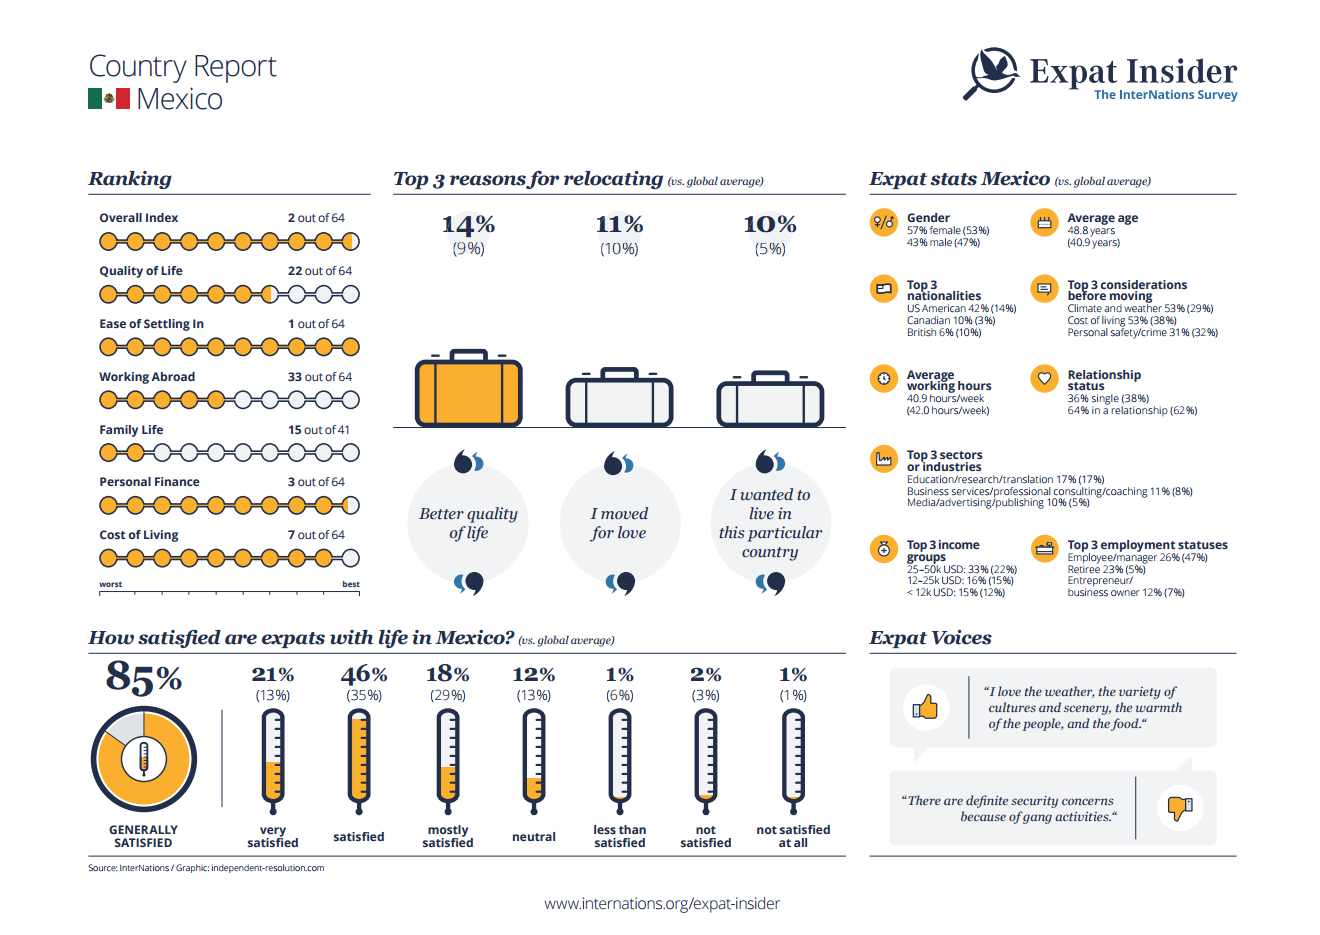 Expat statistics for Mexico - infographic